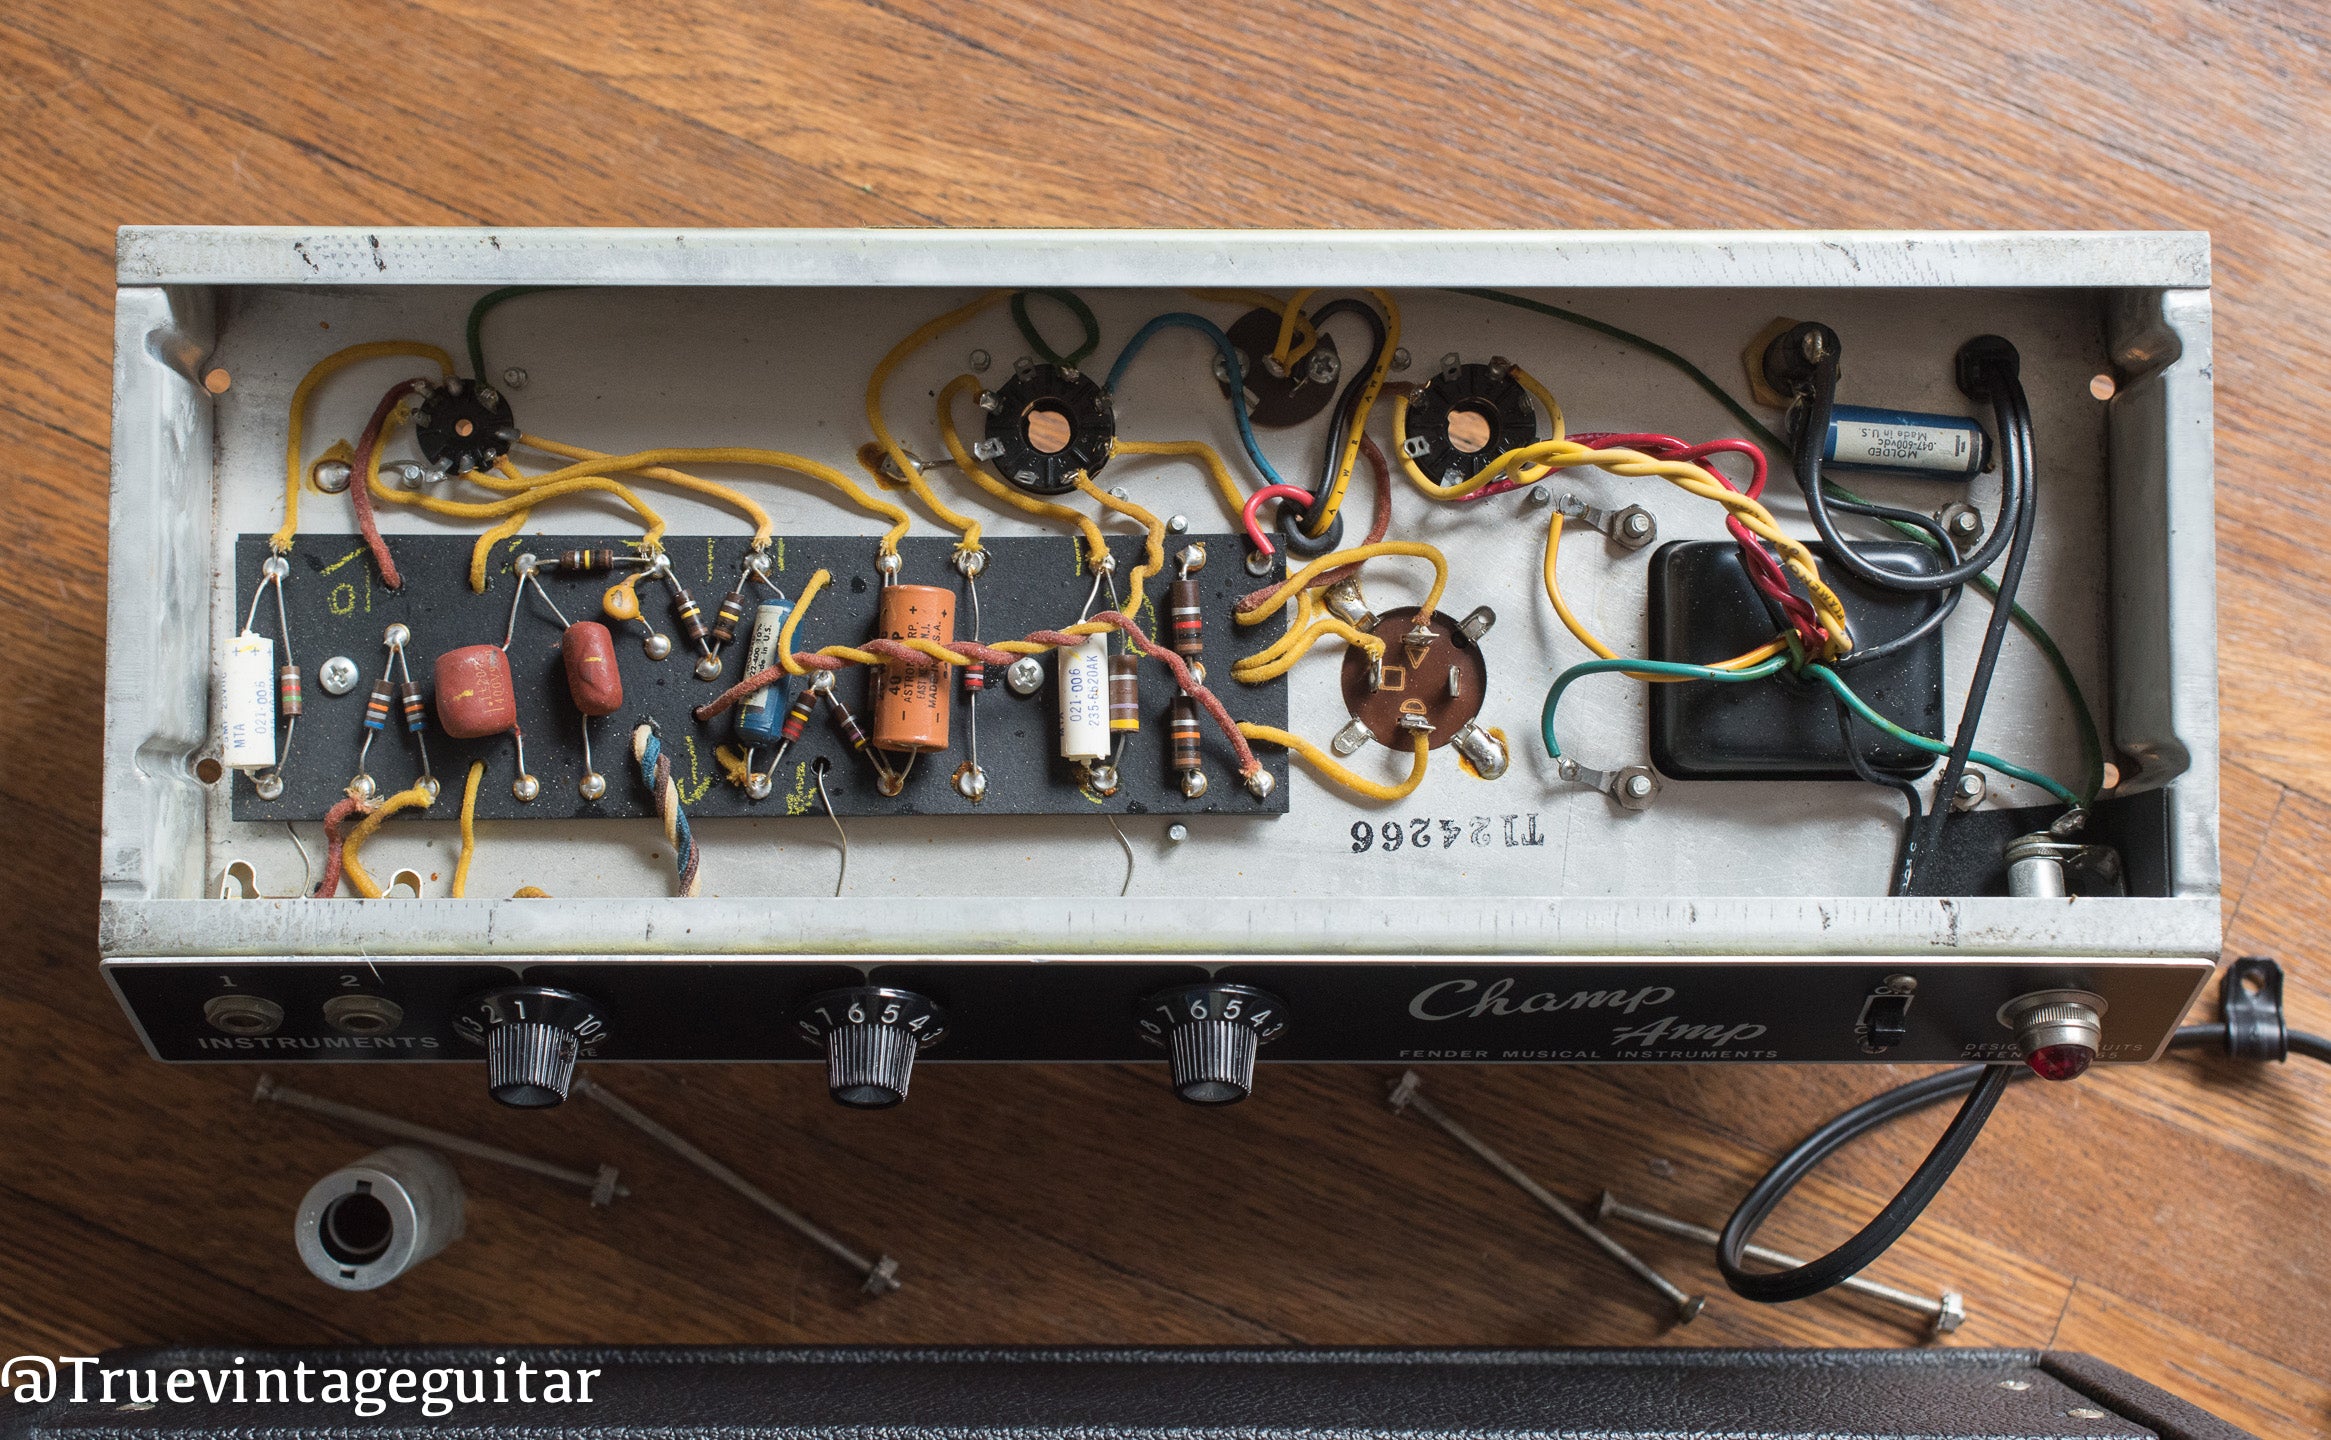 Chassis, circuit, vintage 1966 Fender Champ amp